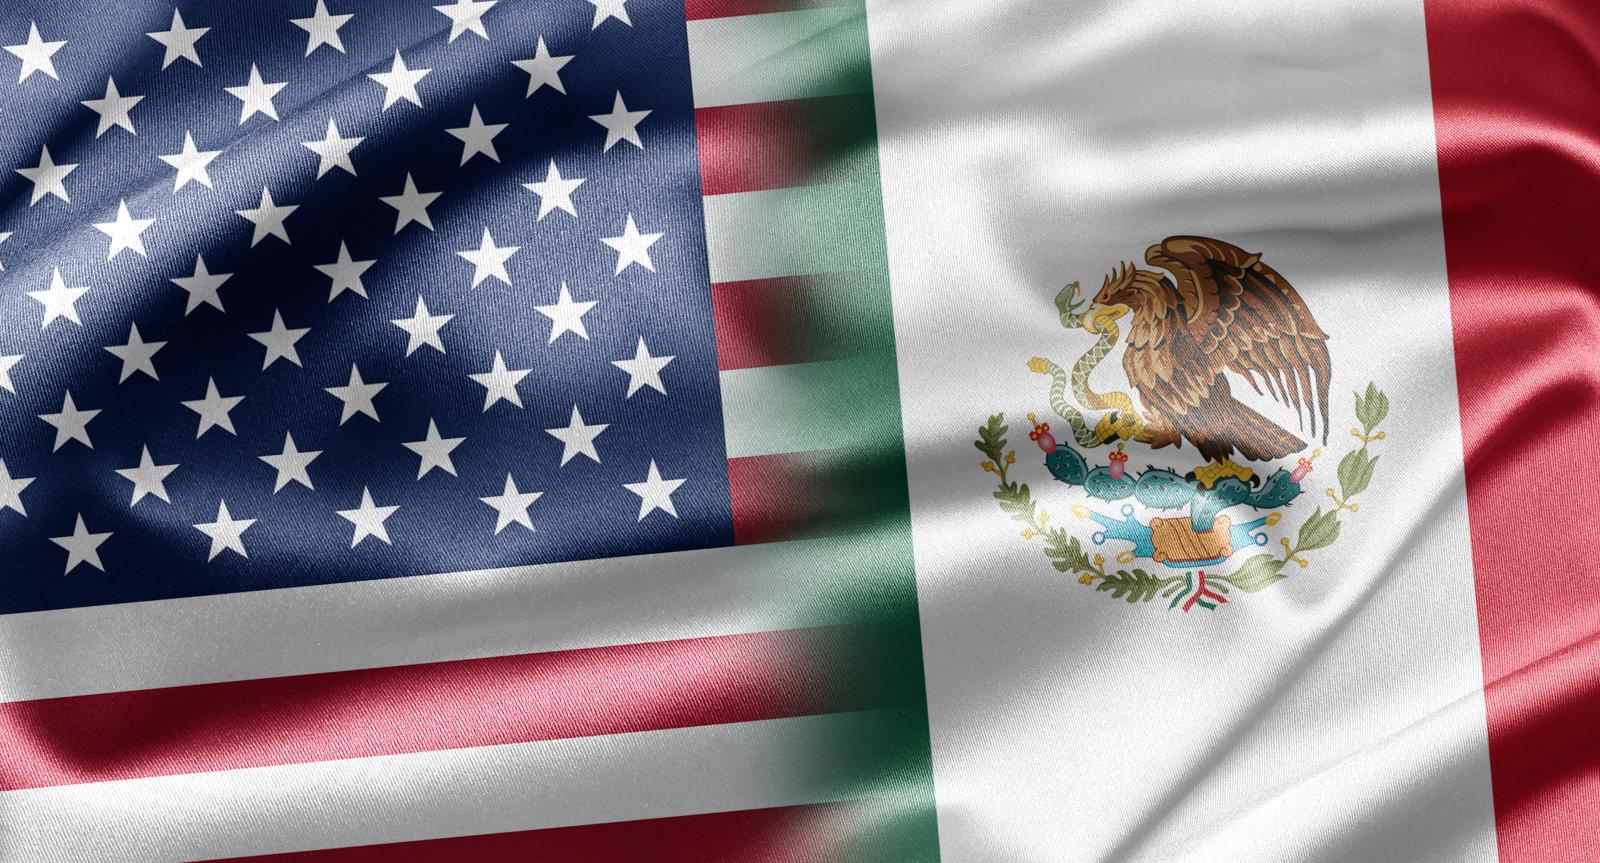 The Mexican Supreme Court has unanimously ruled in favor of U.S. potato growers in a case that should result in all of Mexico being opened up to imports of fresh potatoes from the United States. The excitement following that ruling has been blunted somewhat, however, with news that Mexico’s potato industry could be attempting to slow down or potentially stop the importation of fresh U.S. potatoes into all of Mexico.